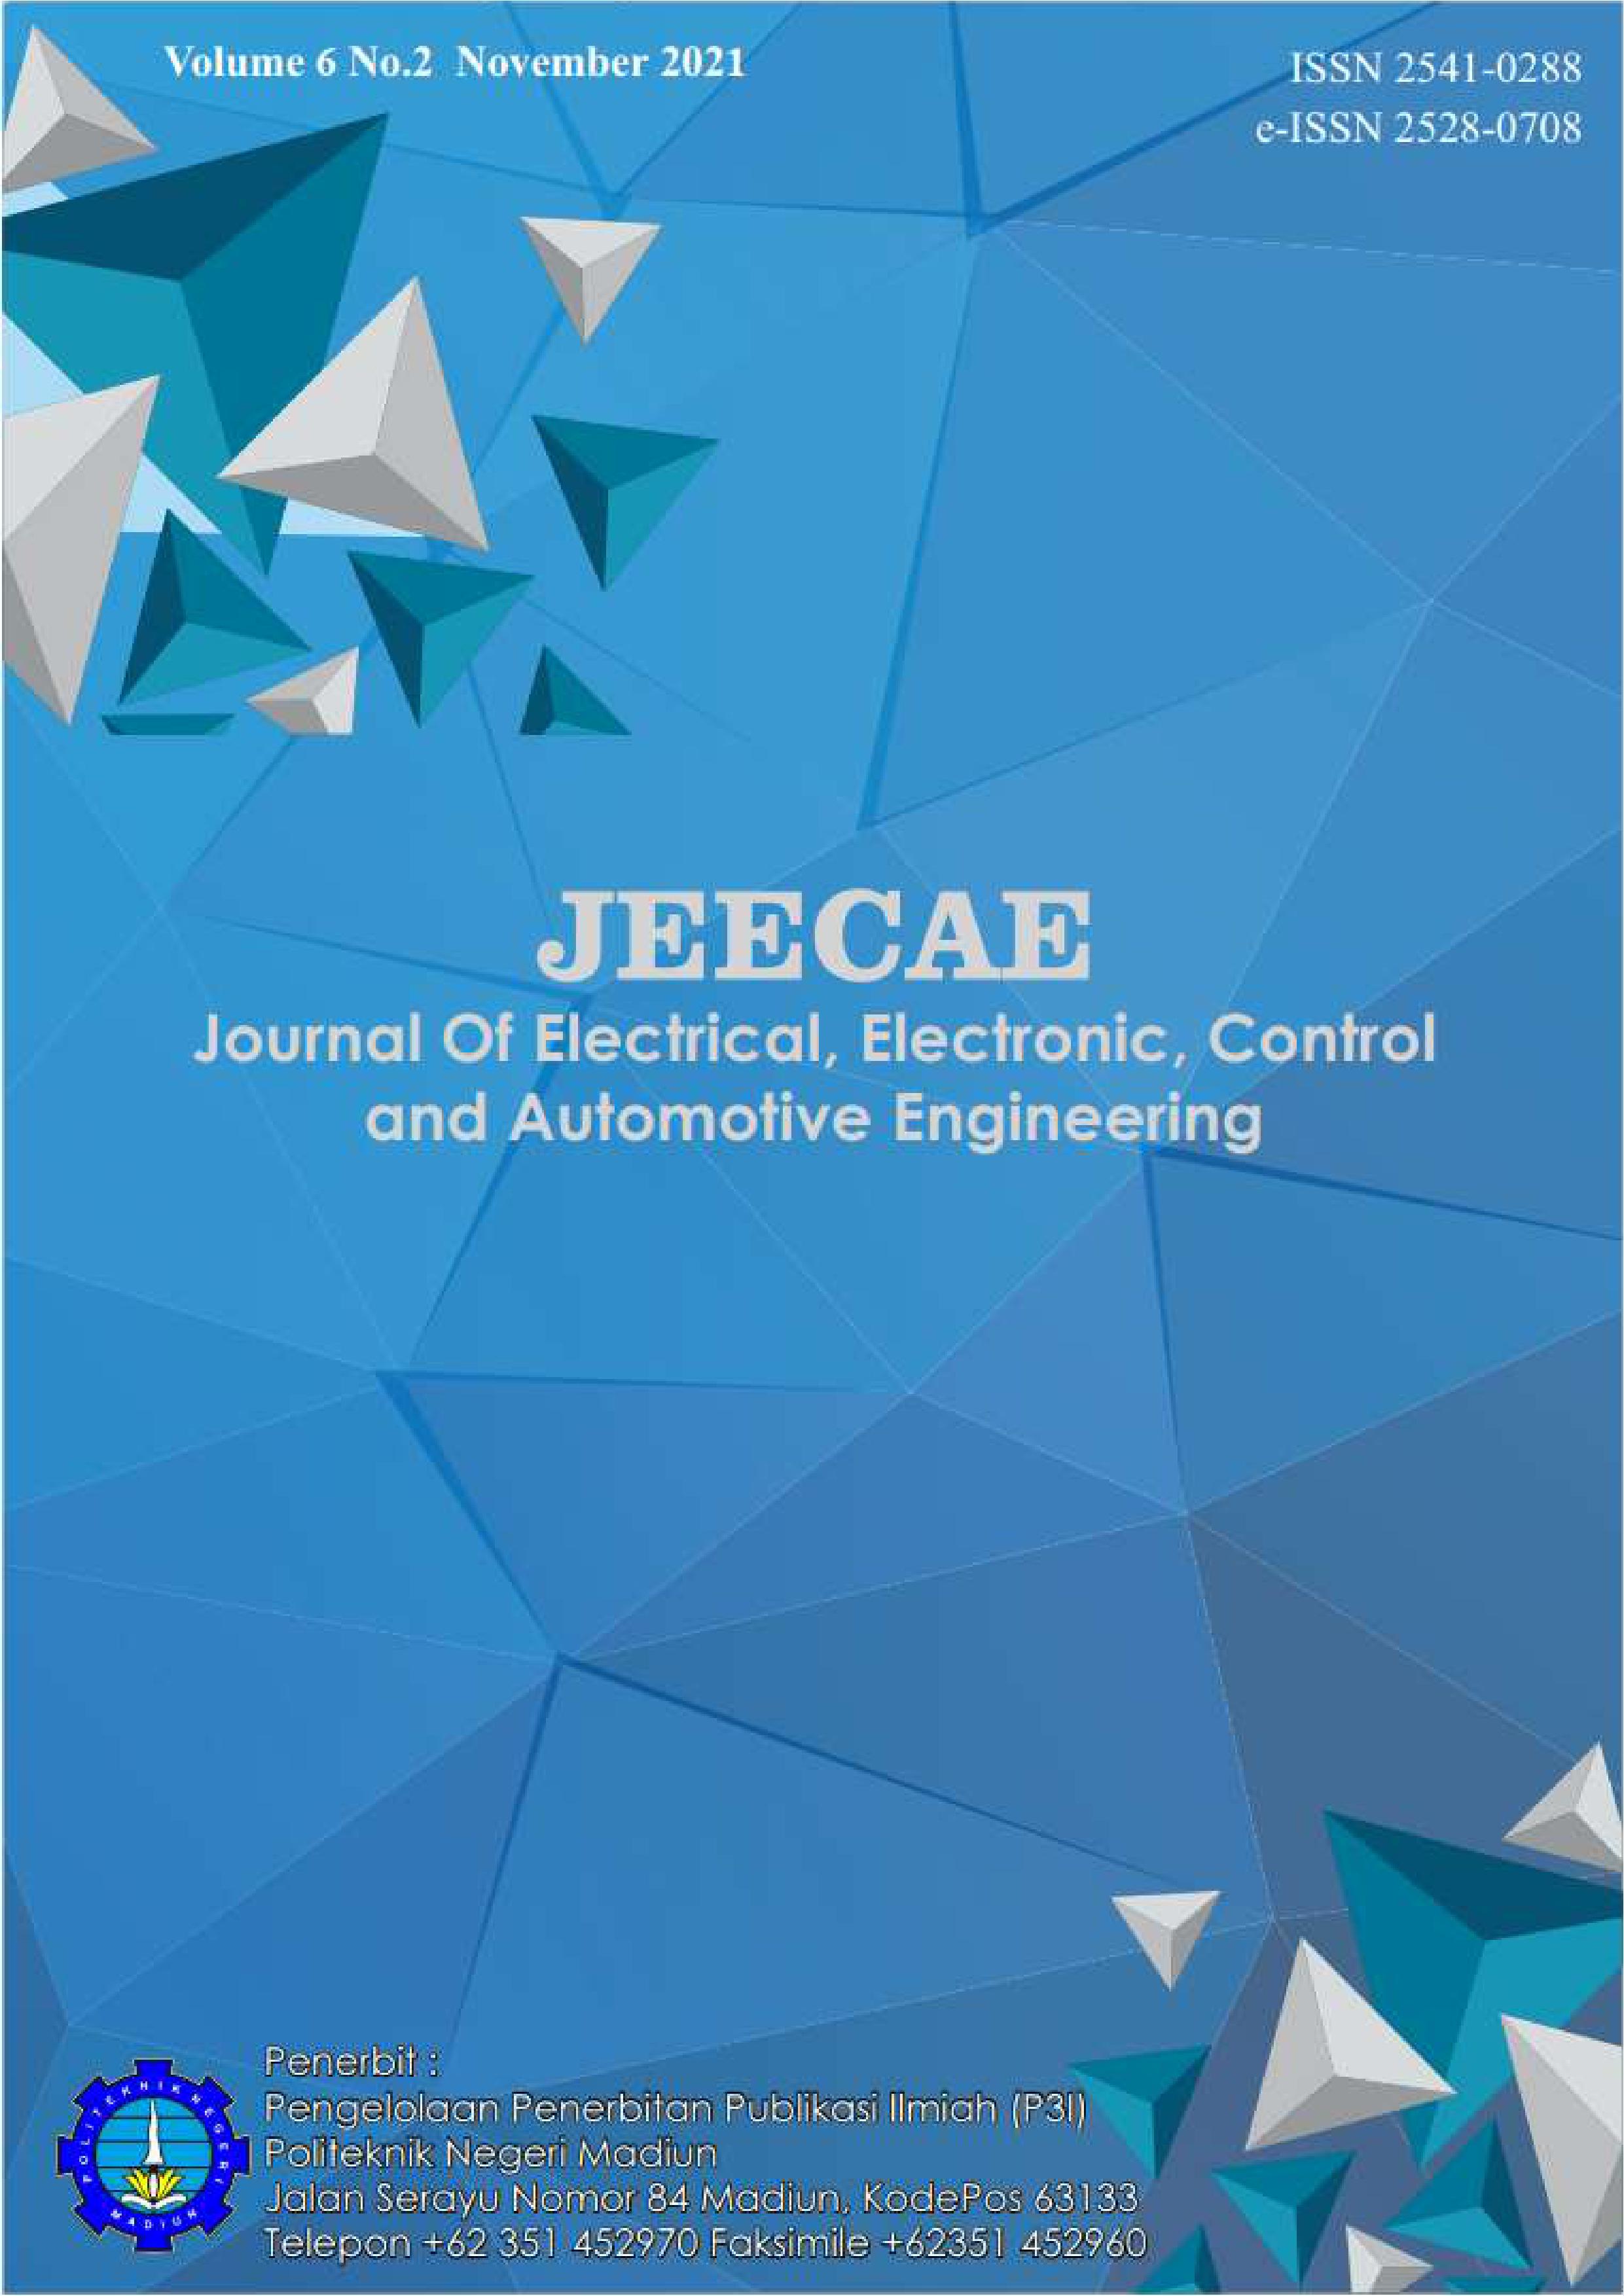 JEECAE - Volume 6, No. 2, 2021 - Front Cover